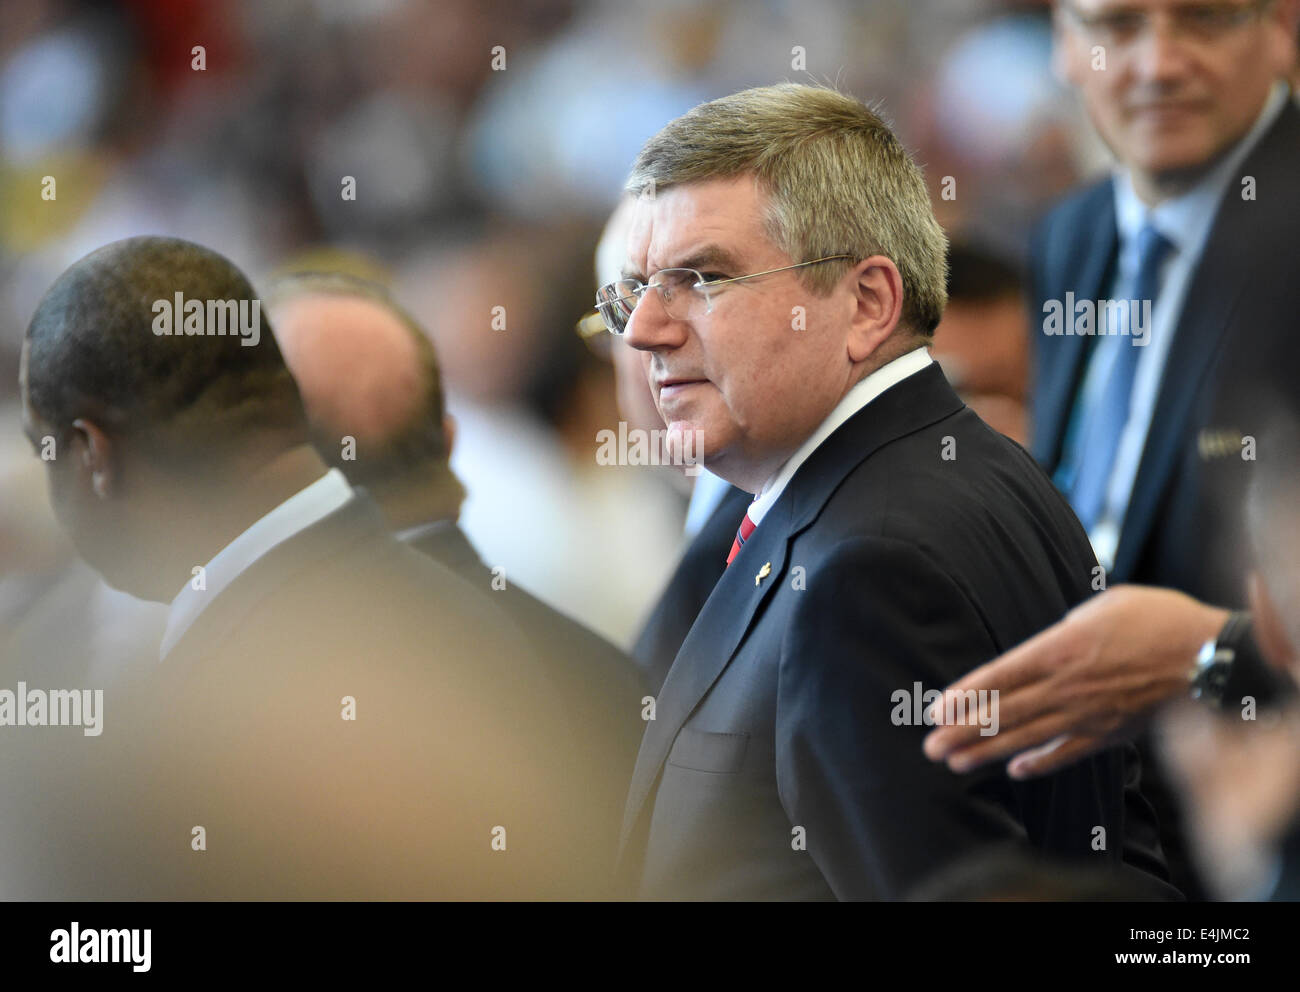 Rio de Janeiro, Brazil. 13th July, 2014. President of the International Olympic Committee (IOC) Thomas Bach seen in the stands prior to the FIFA World Cup 2014 final soccer match between Germany and Argentina at the Estadio do Maracana in Rio de Janeiro, Brazil, 13 July 2014. Photo: Thomas Eisenhuth/dpa/Alamy Live News Stock Photo